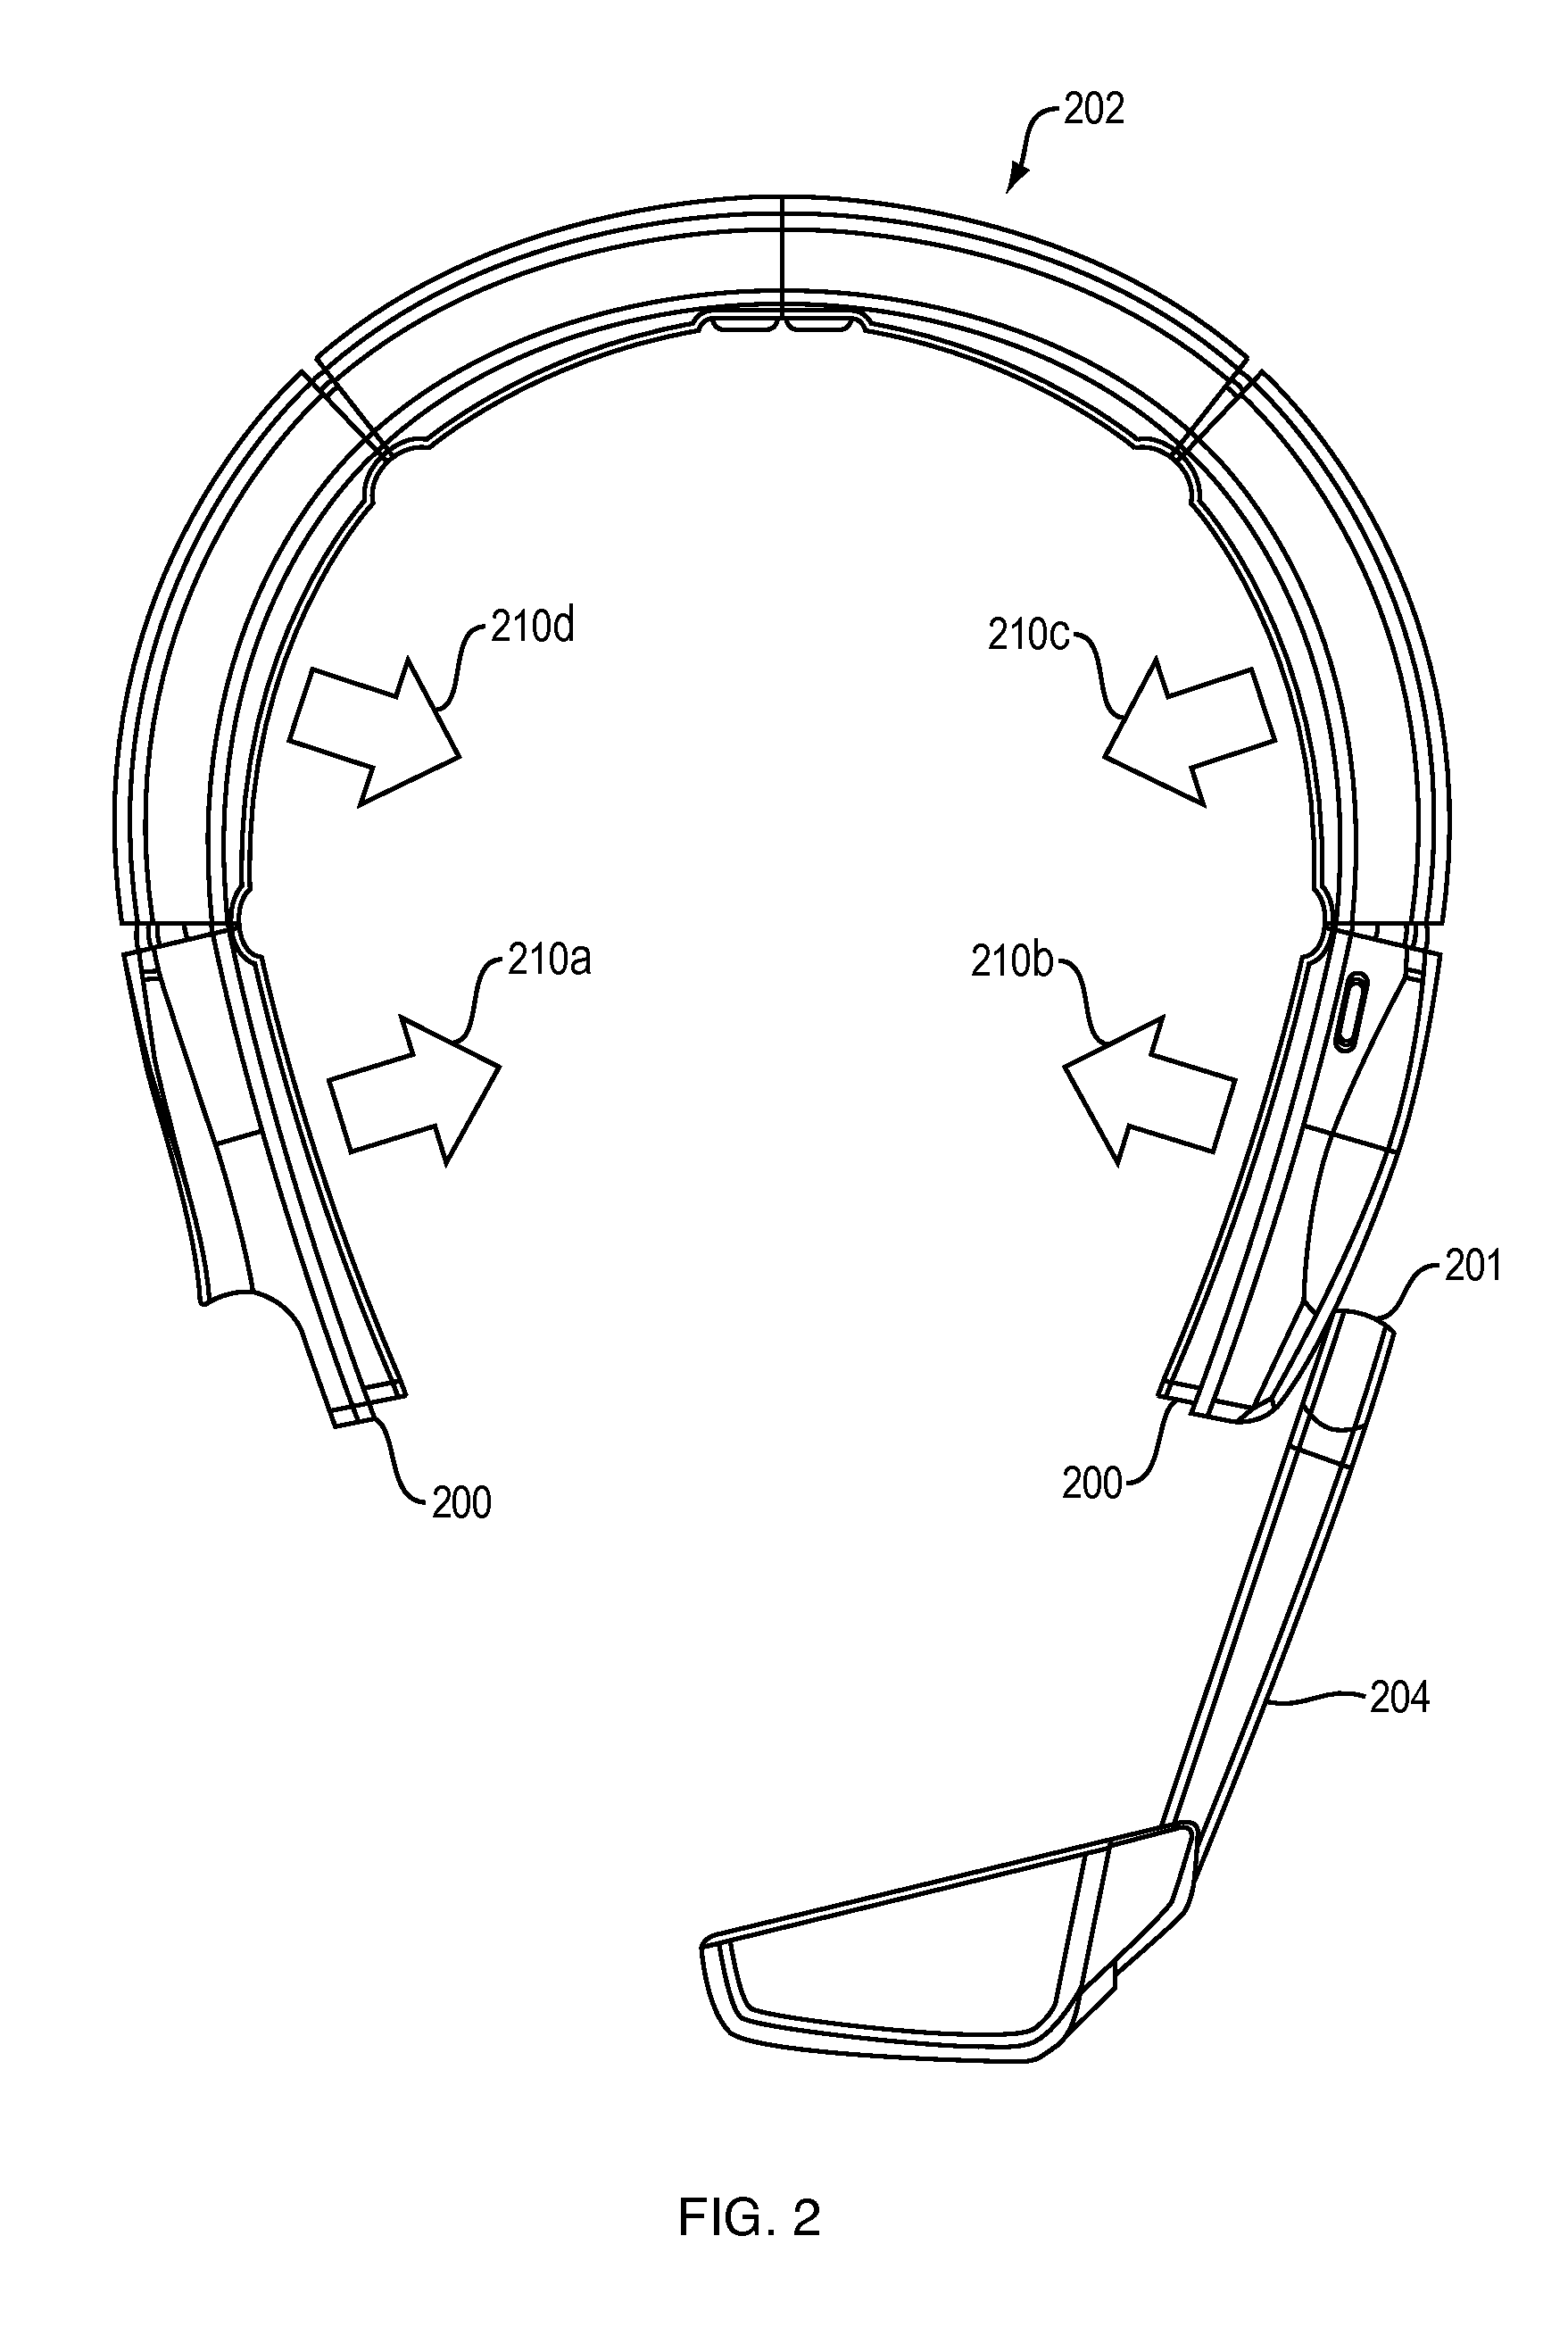 Spring-loaded supports for head set computer